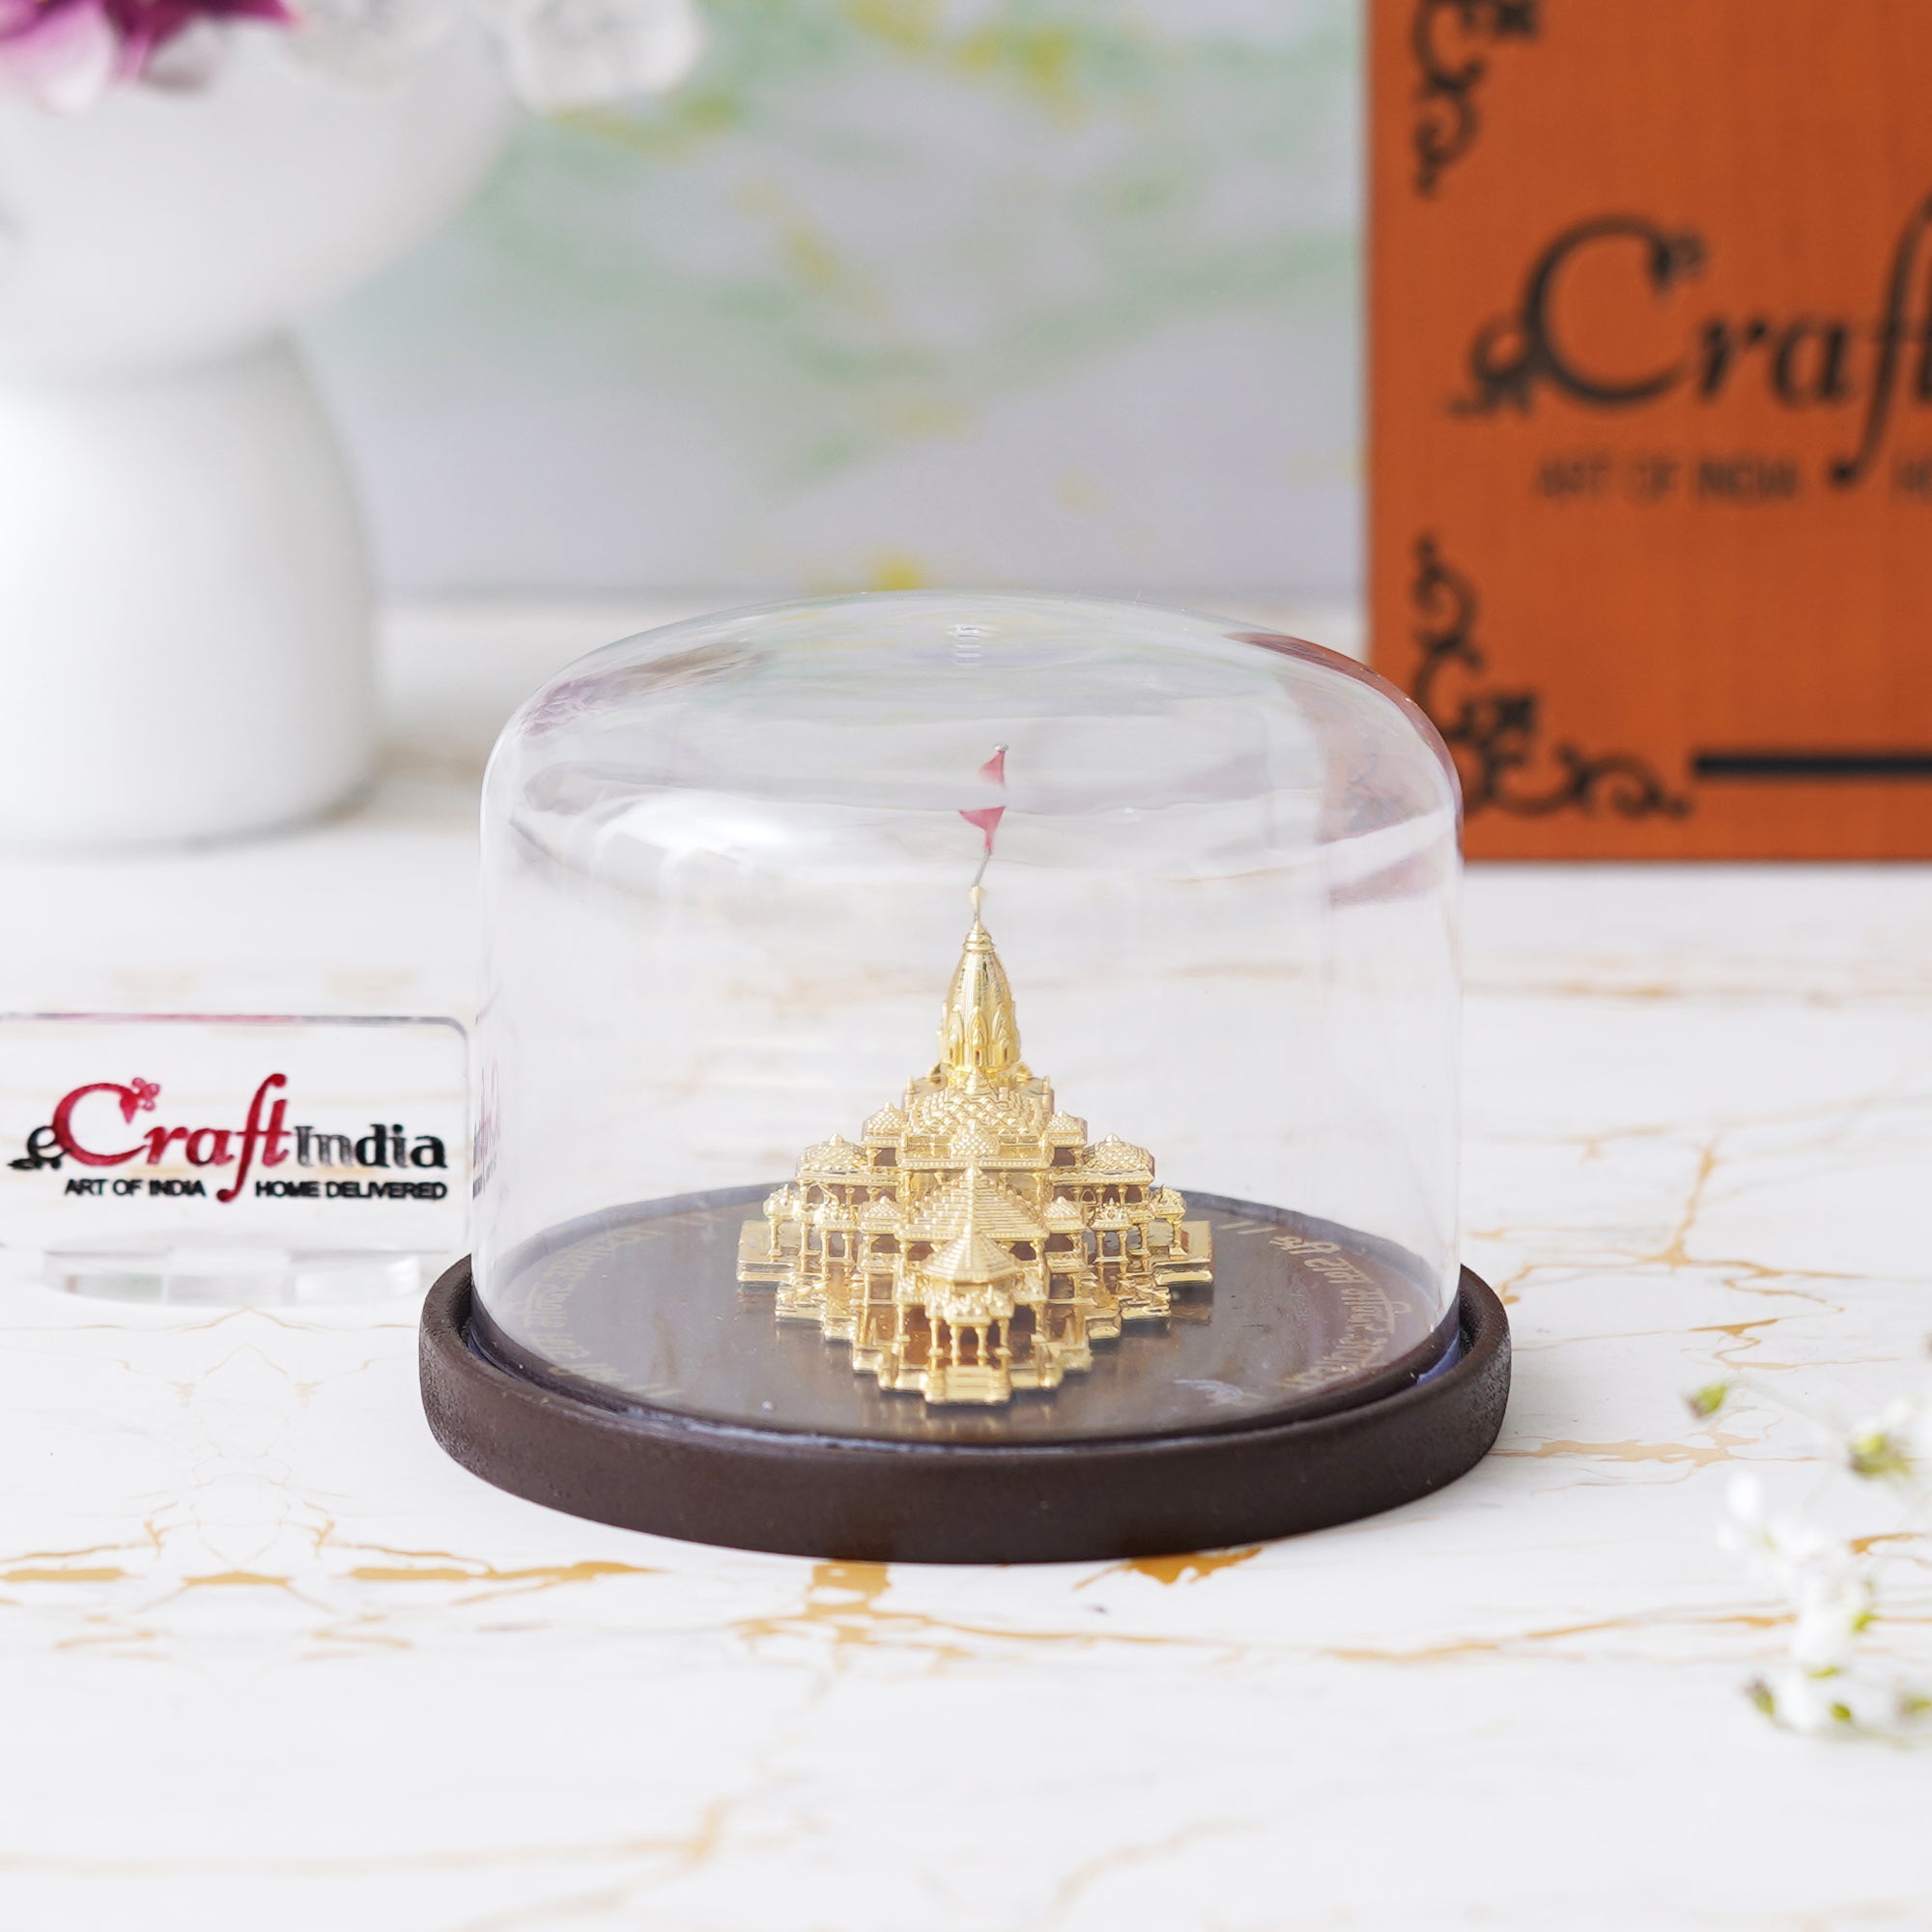 eCraftIndia Golden Shri Ram Mandir Ayodhya Model Authentic Designer Temple Covered by a Glass Dome - Perfect for Home Decor, and Spiritual Gifting 4